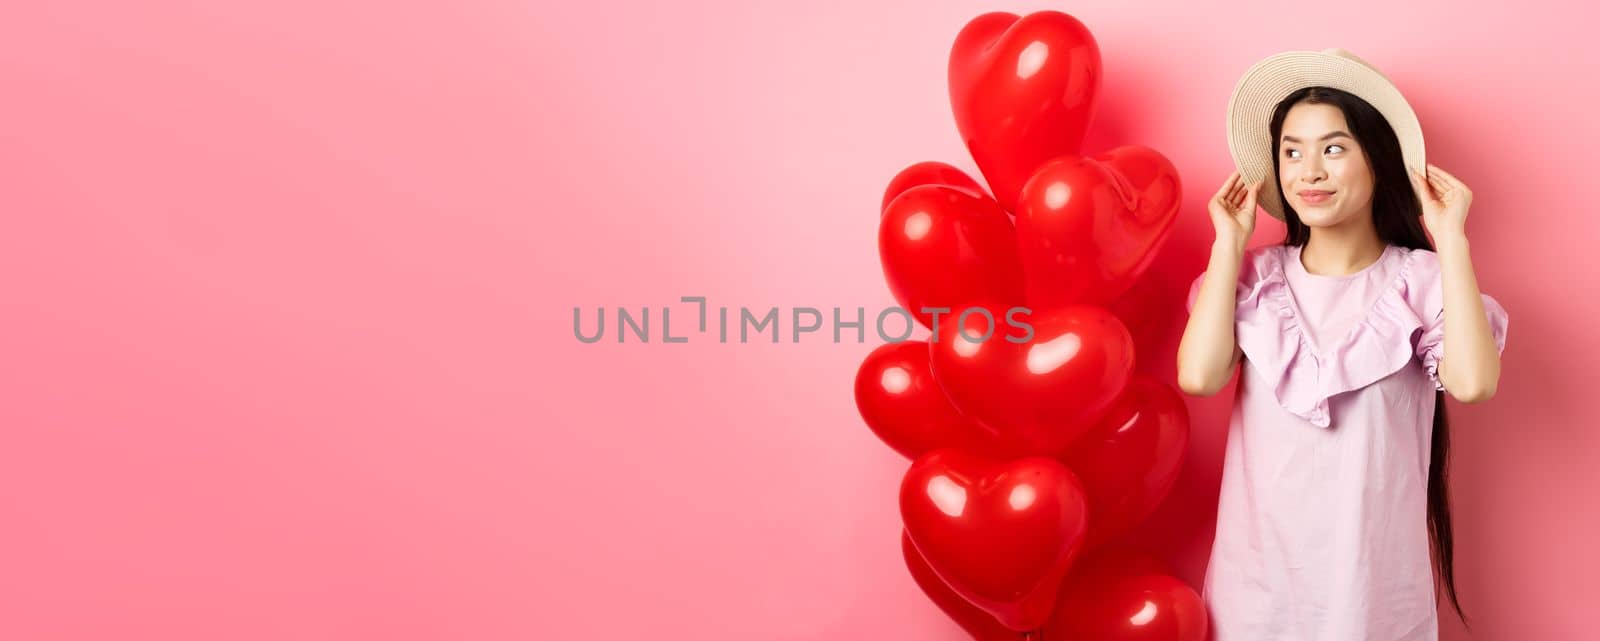 Tender and romantic asian teen girl wearing straw hat and dress on date, standing near valentines day heart balloons and looking aside with dreamy smile, pink background by Benzoix